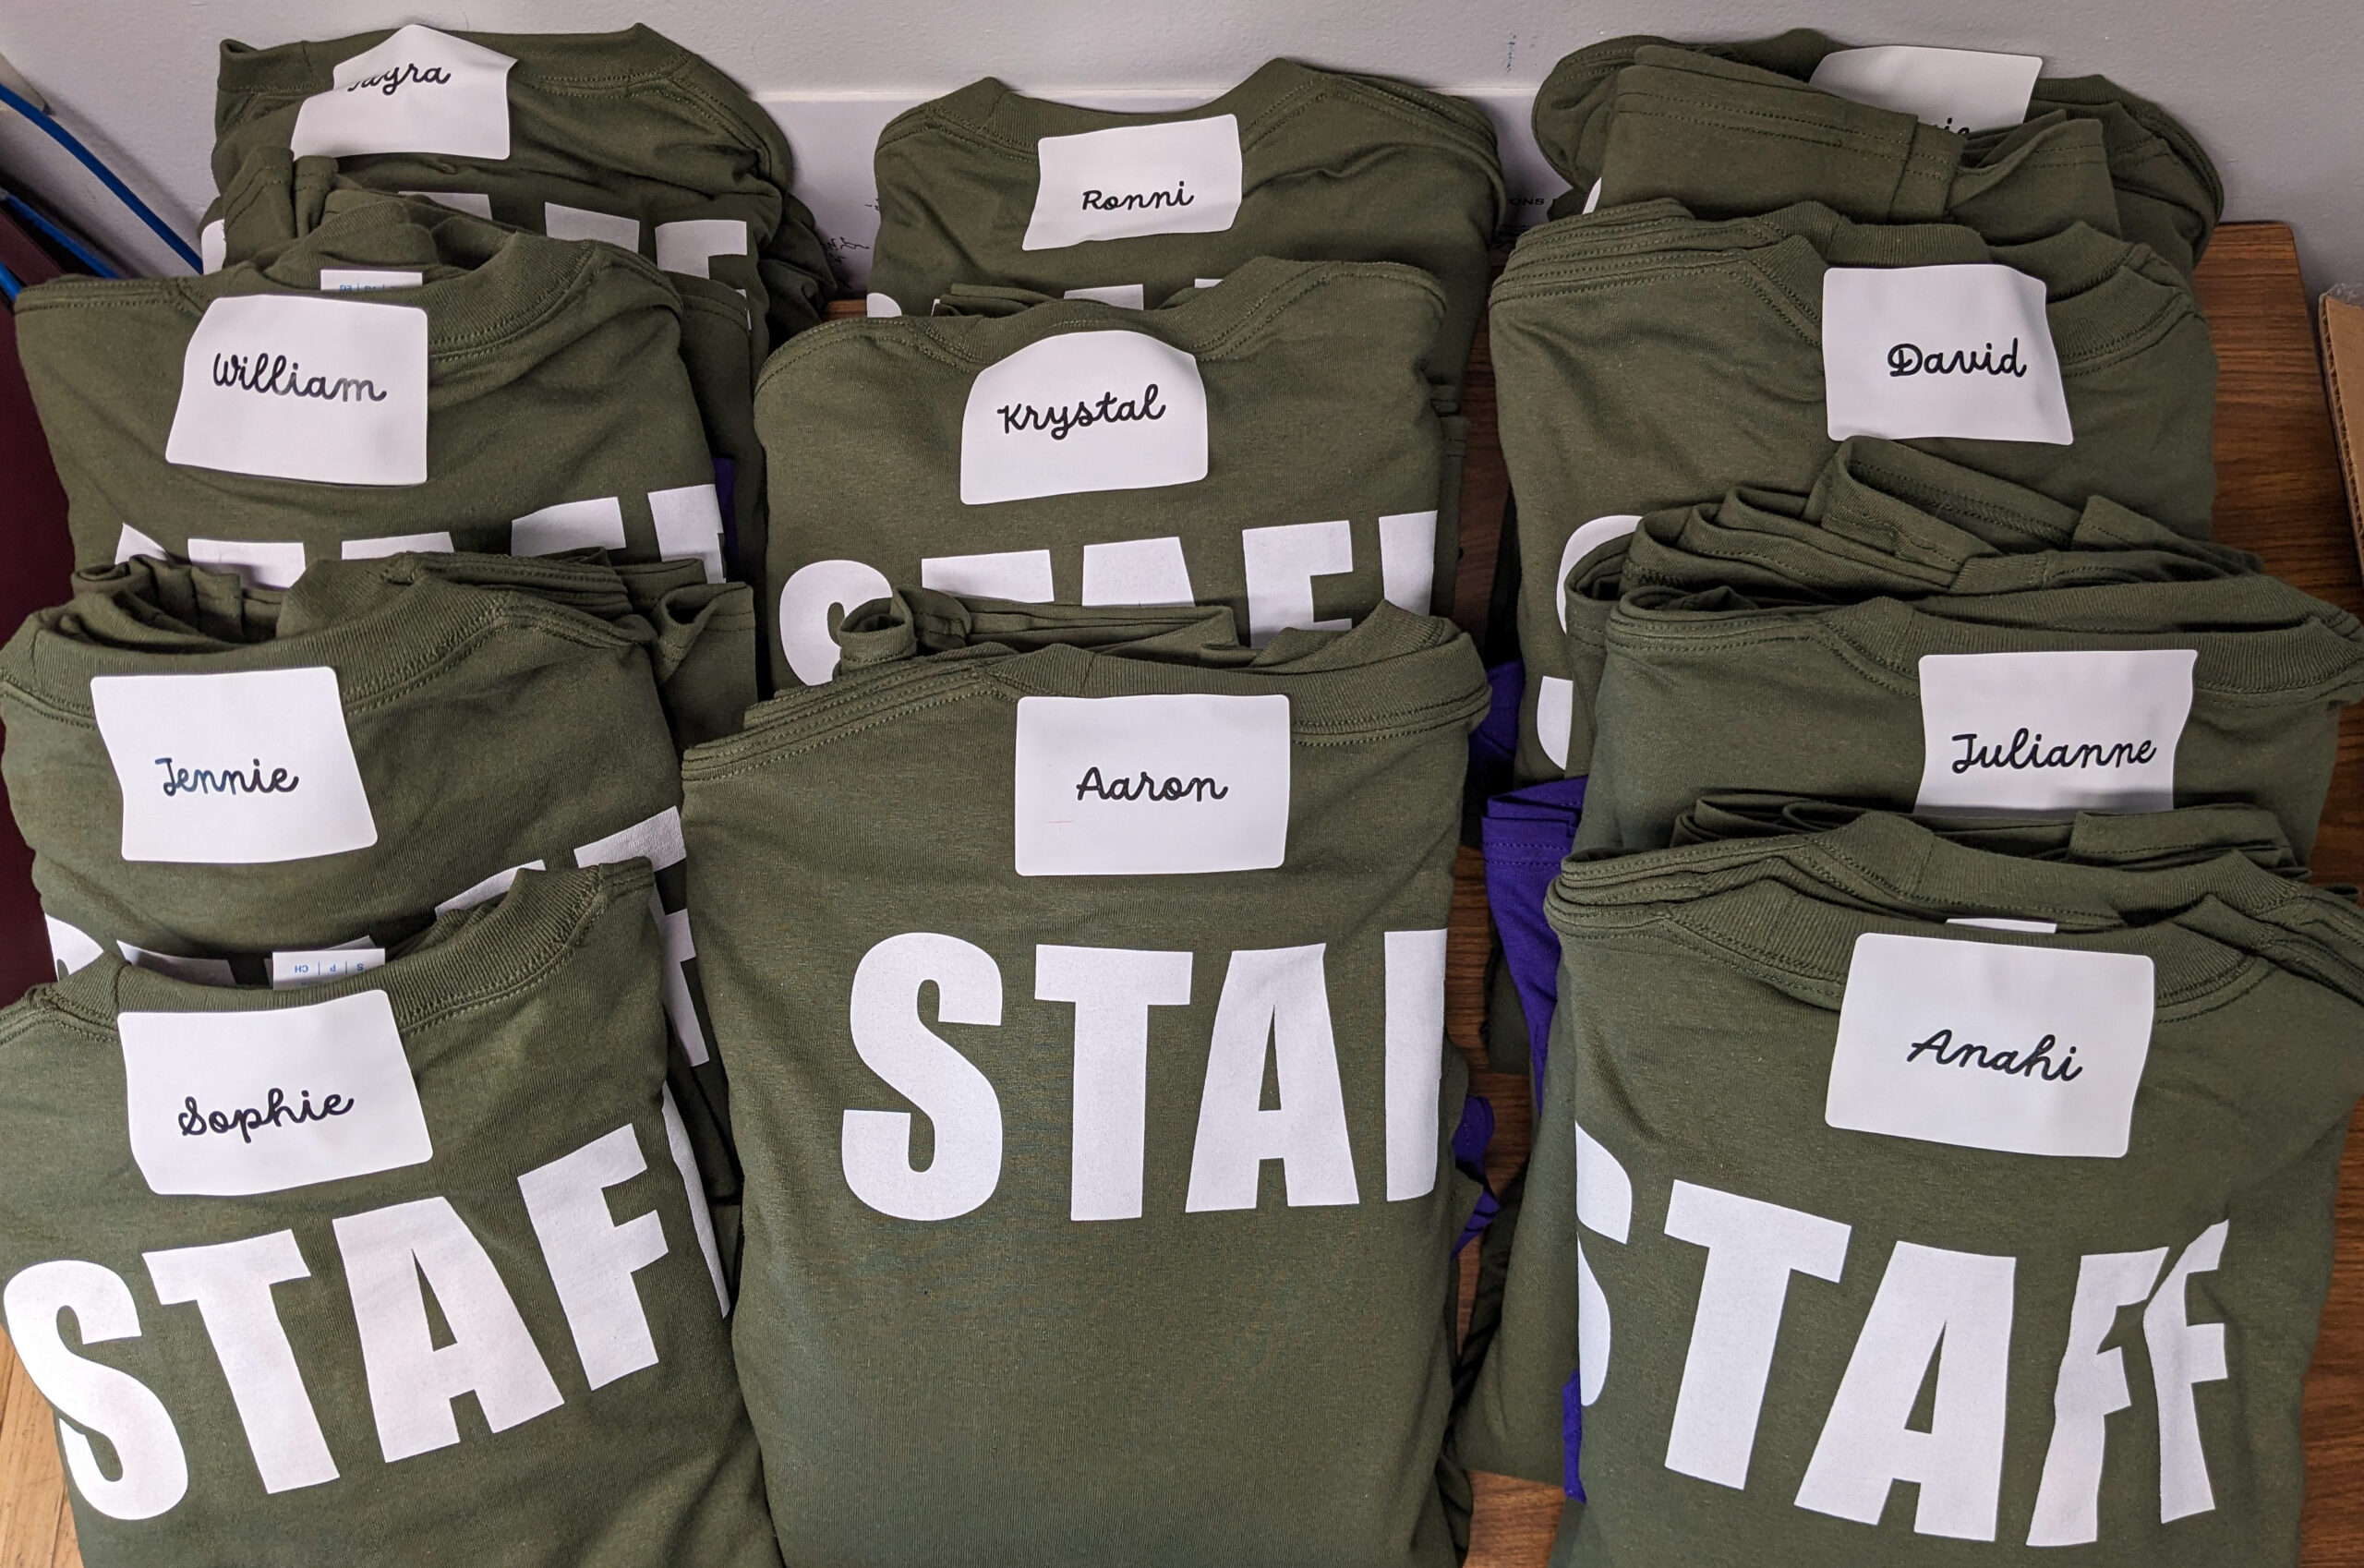 Green shirts for student Staff are labeled with interns' names.